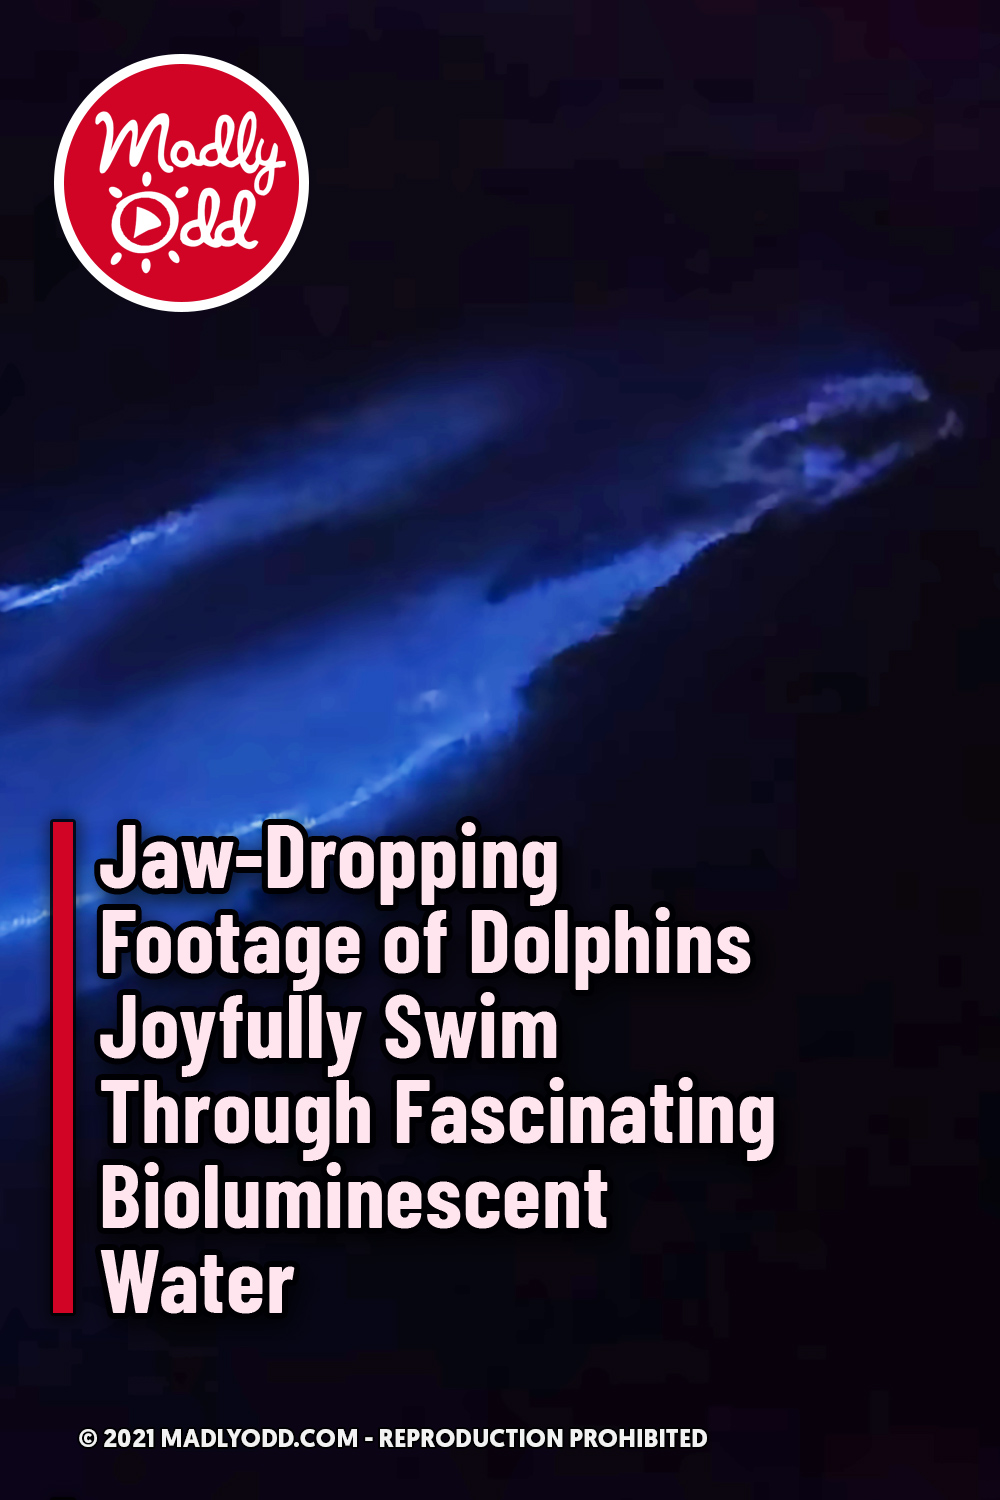 Jaw-Dropping Footage of Dolphins Joyfully Swim Through Fascinating Bioluminescent Water